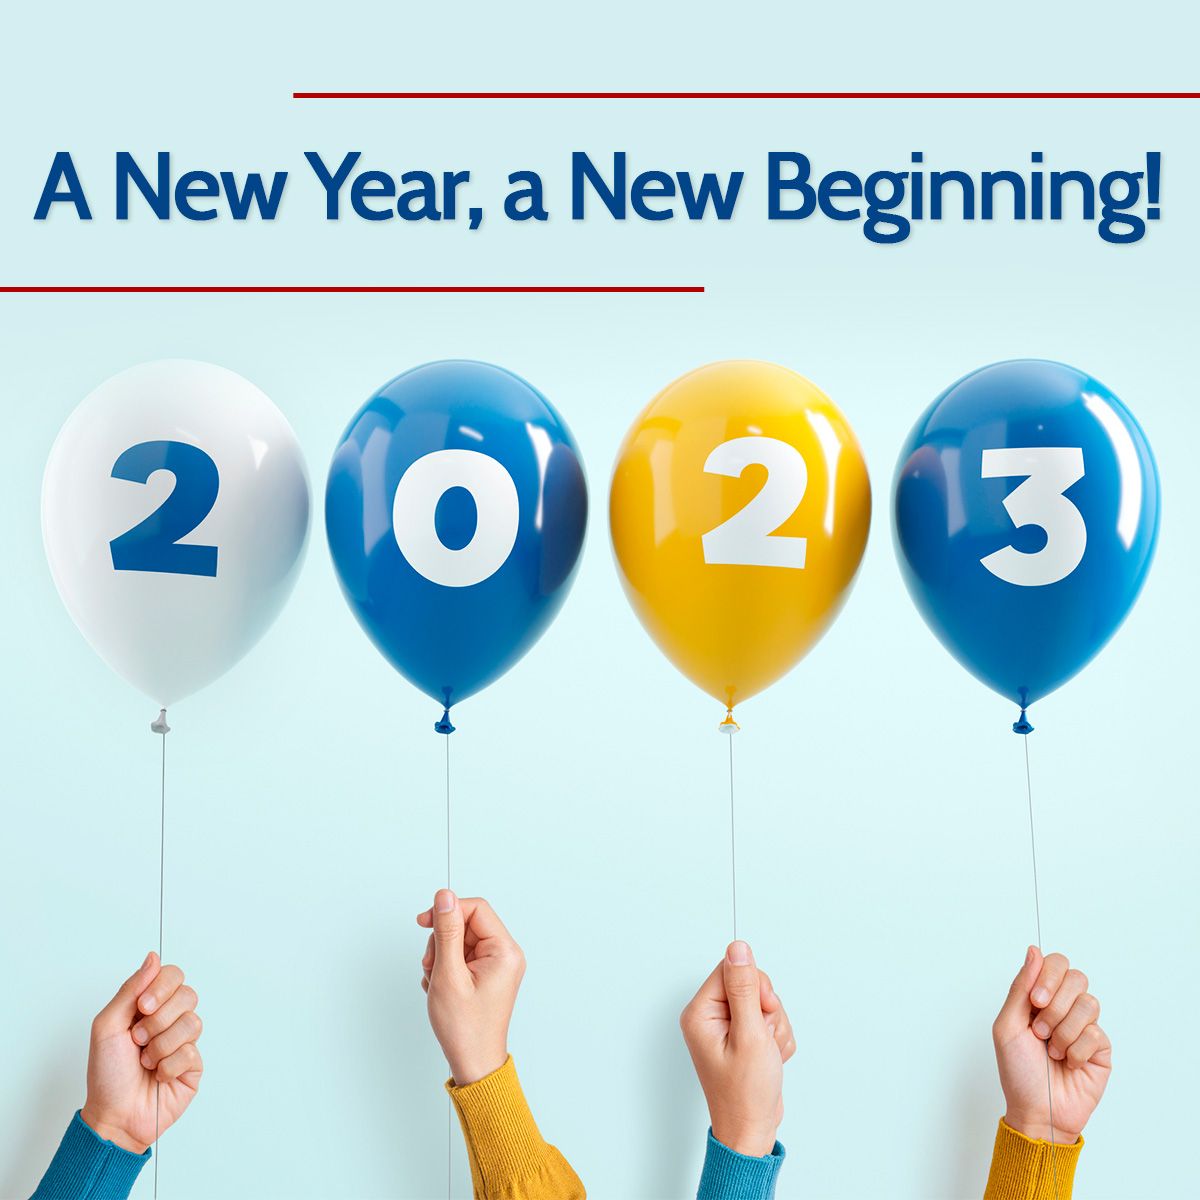 A New Year, a New Beginning!